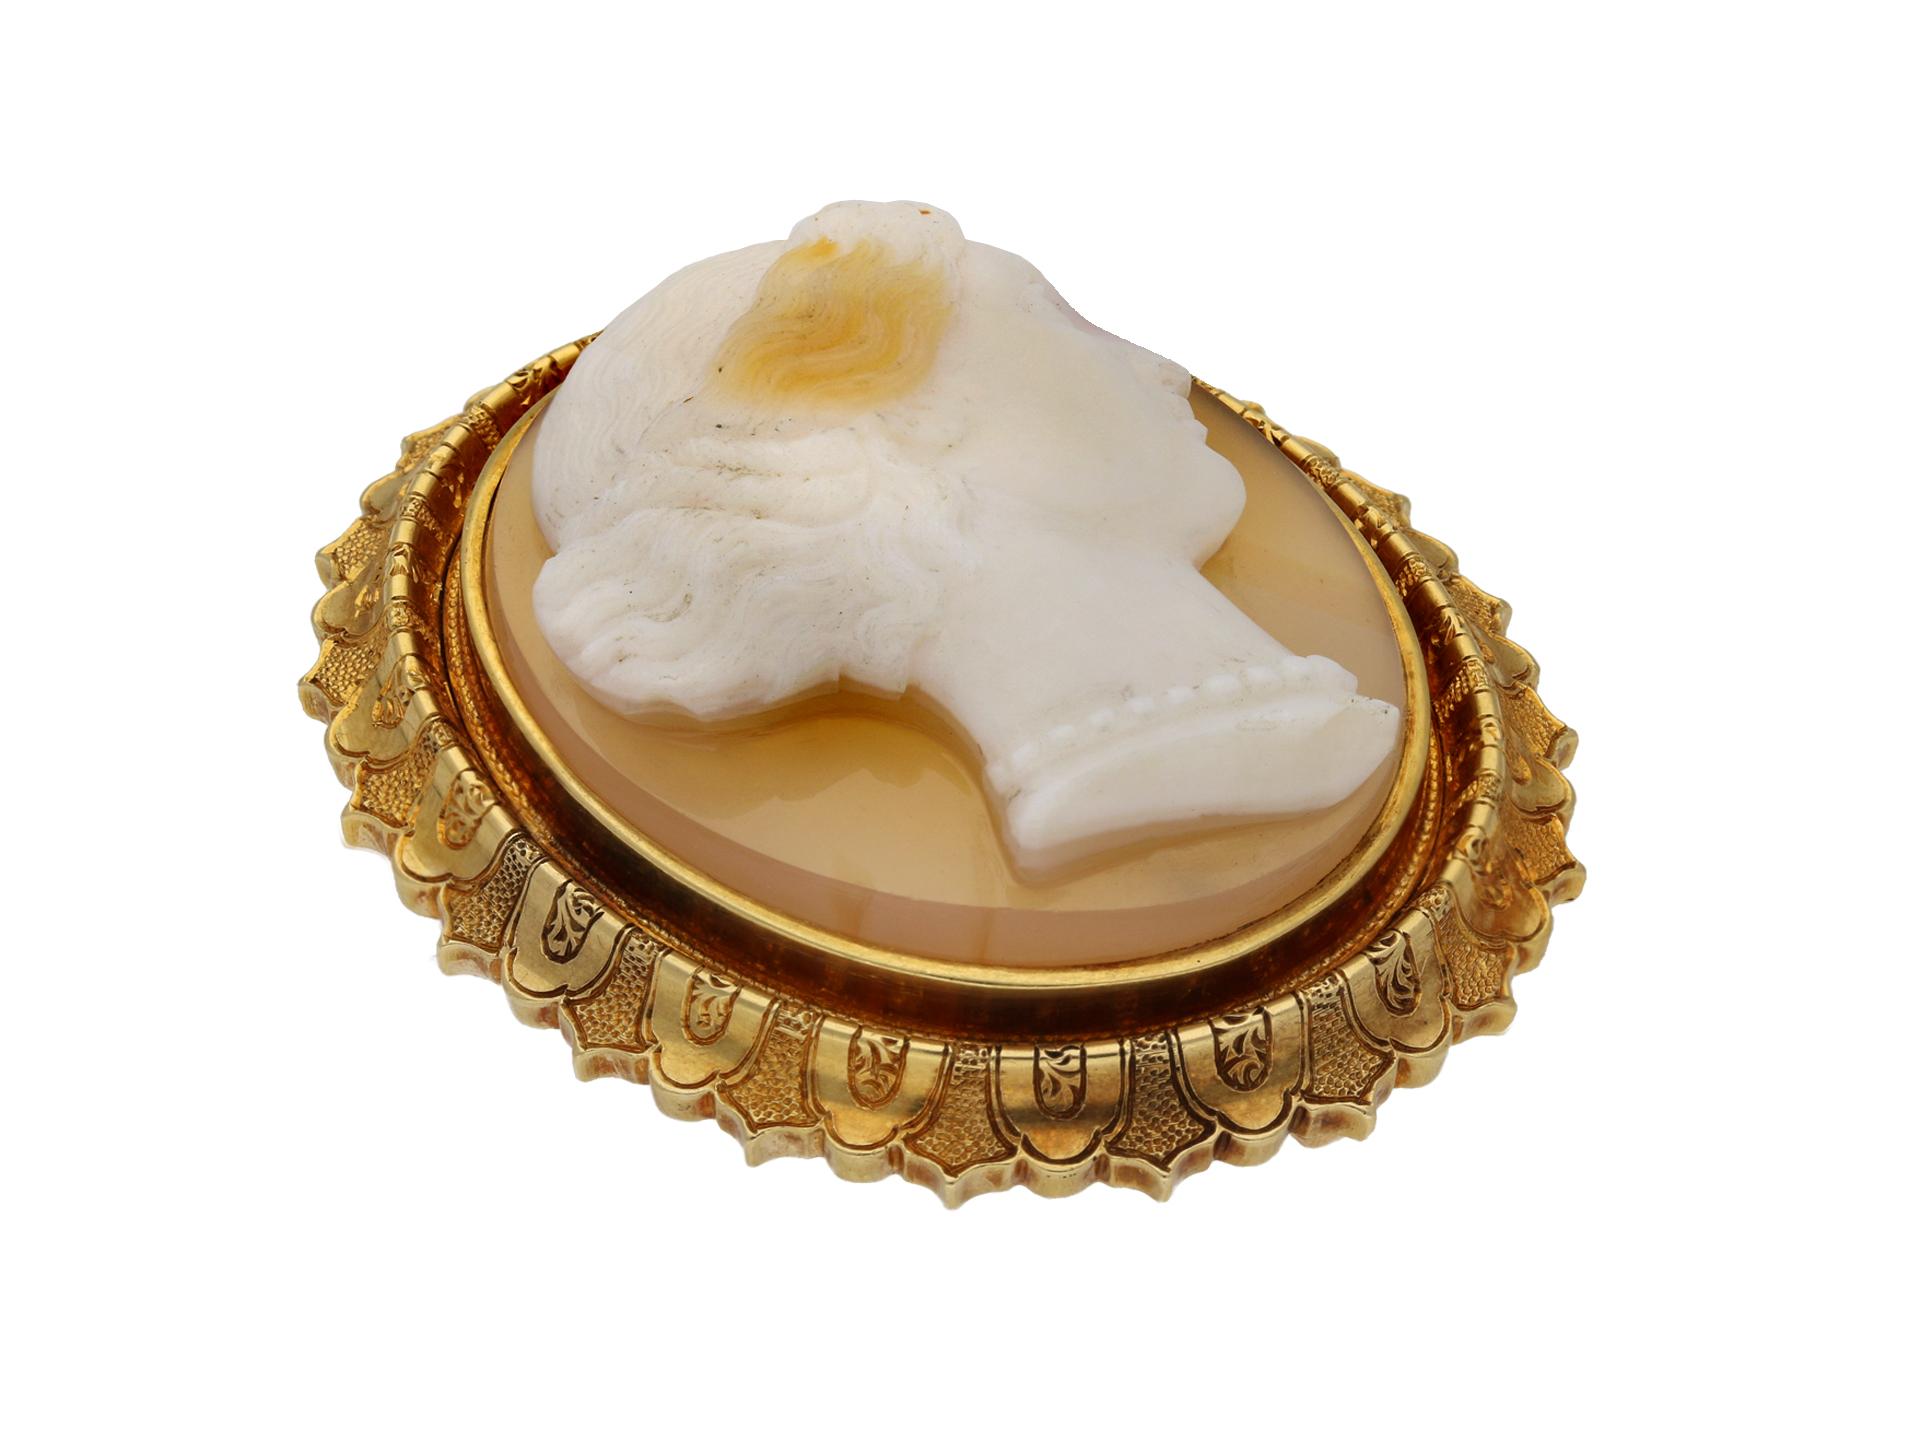 Victorian hardstone cameo brooch. Set with an oval cameo in hardstone depicting the profile of a woman in the classical style, featuring a decorative engraved border and fitted to reverse with secure hinge pin. Marked yellow gold, maker's mark 'PR',